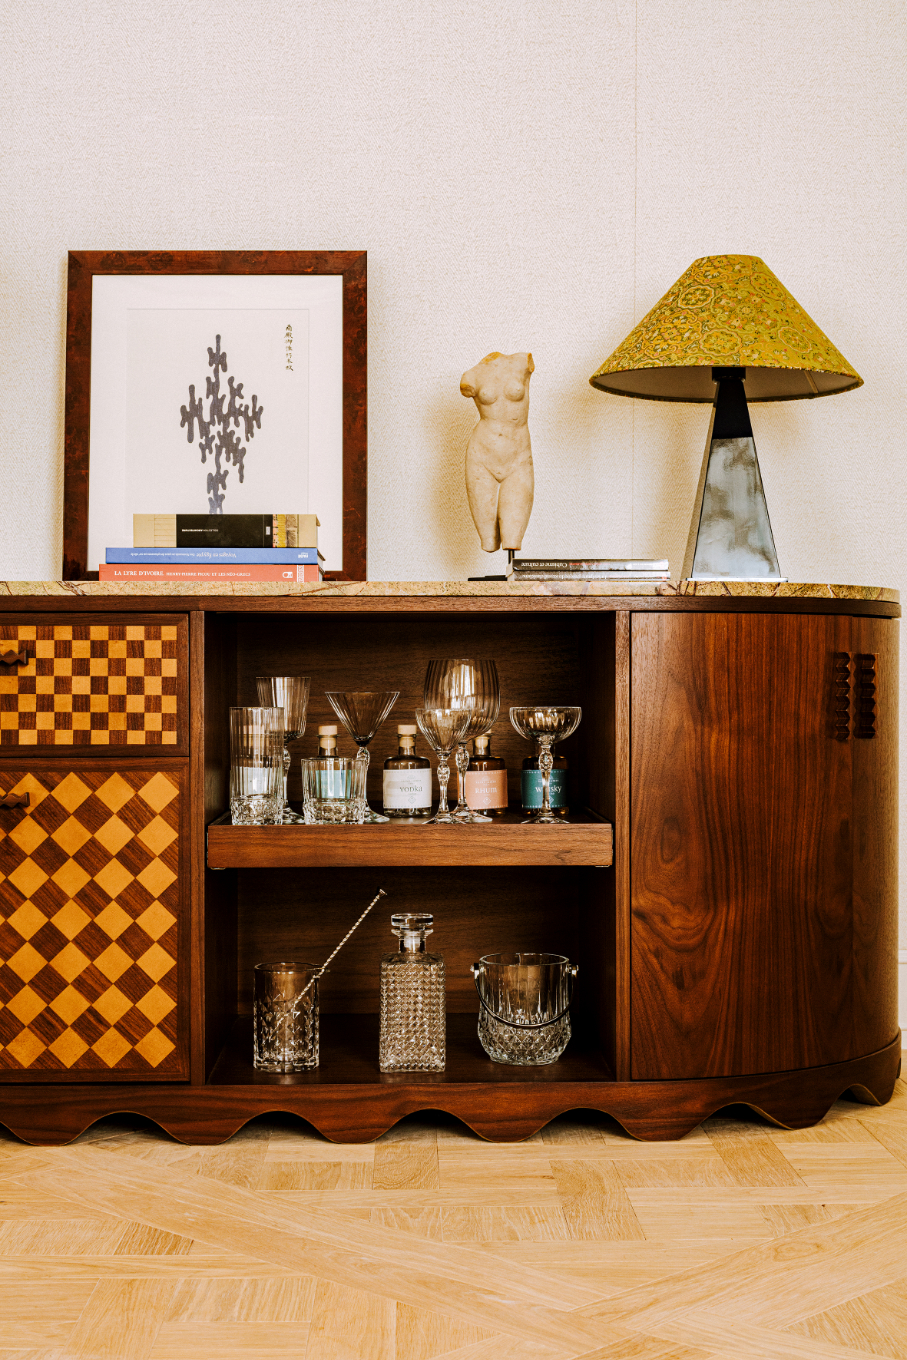 A scalloped wooden sideboard with a checkerboard facade and mini bar utensils and glassware